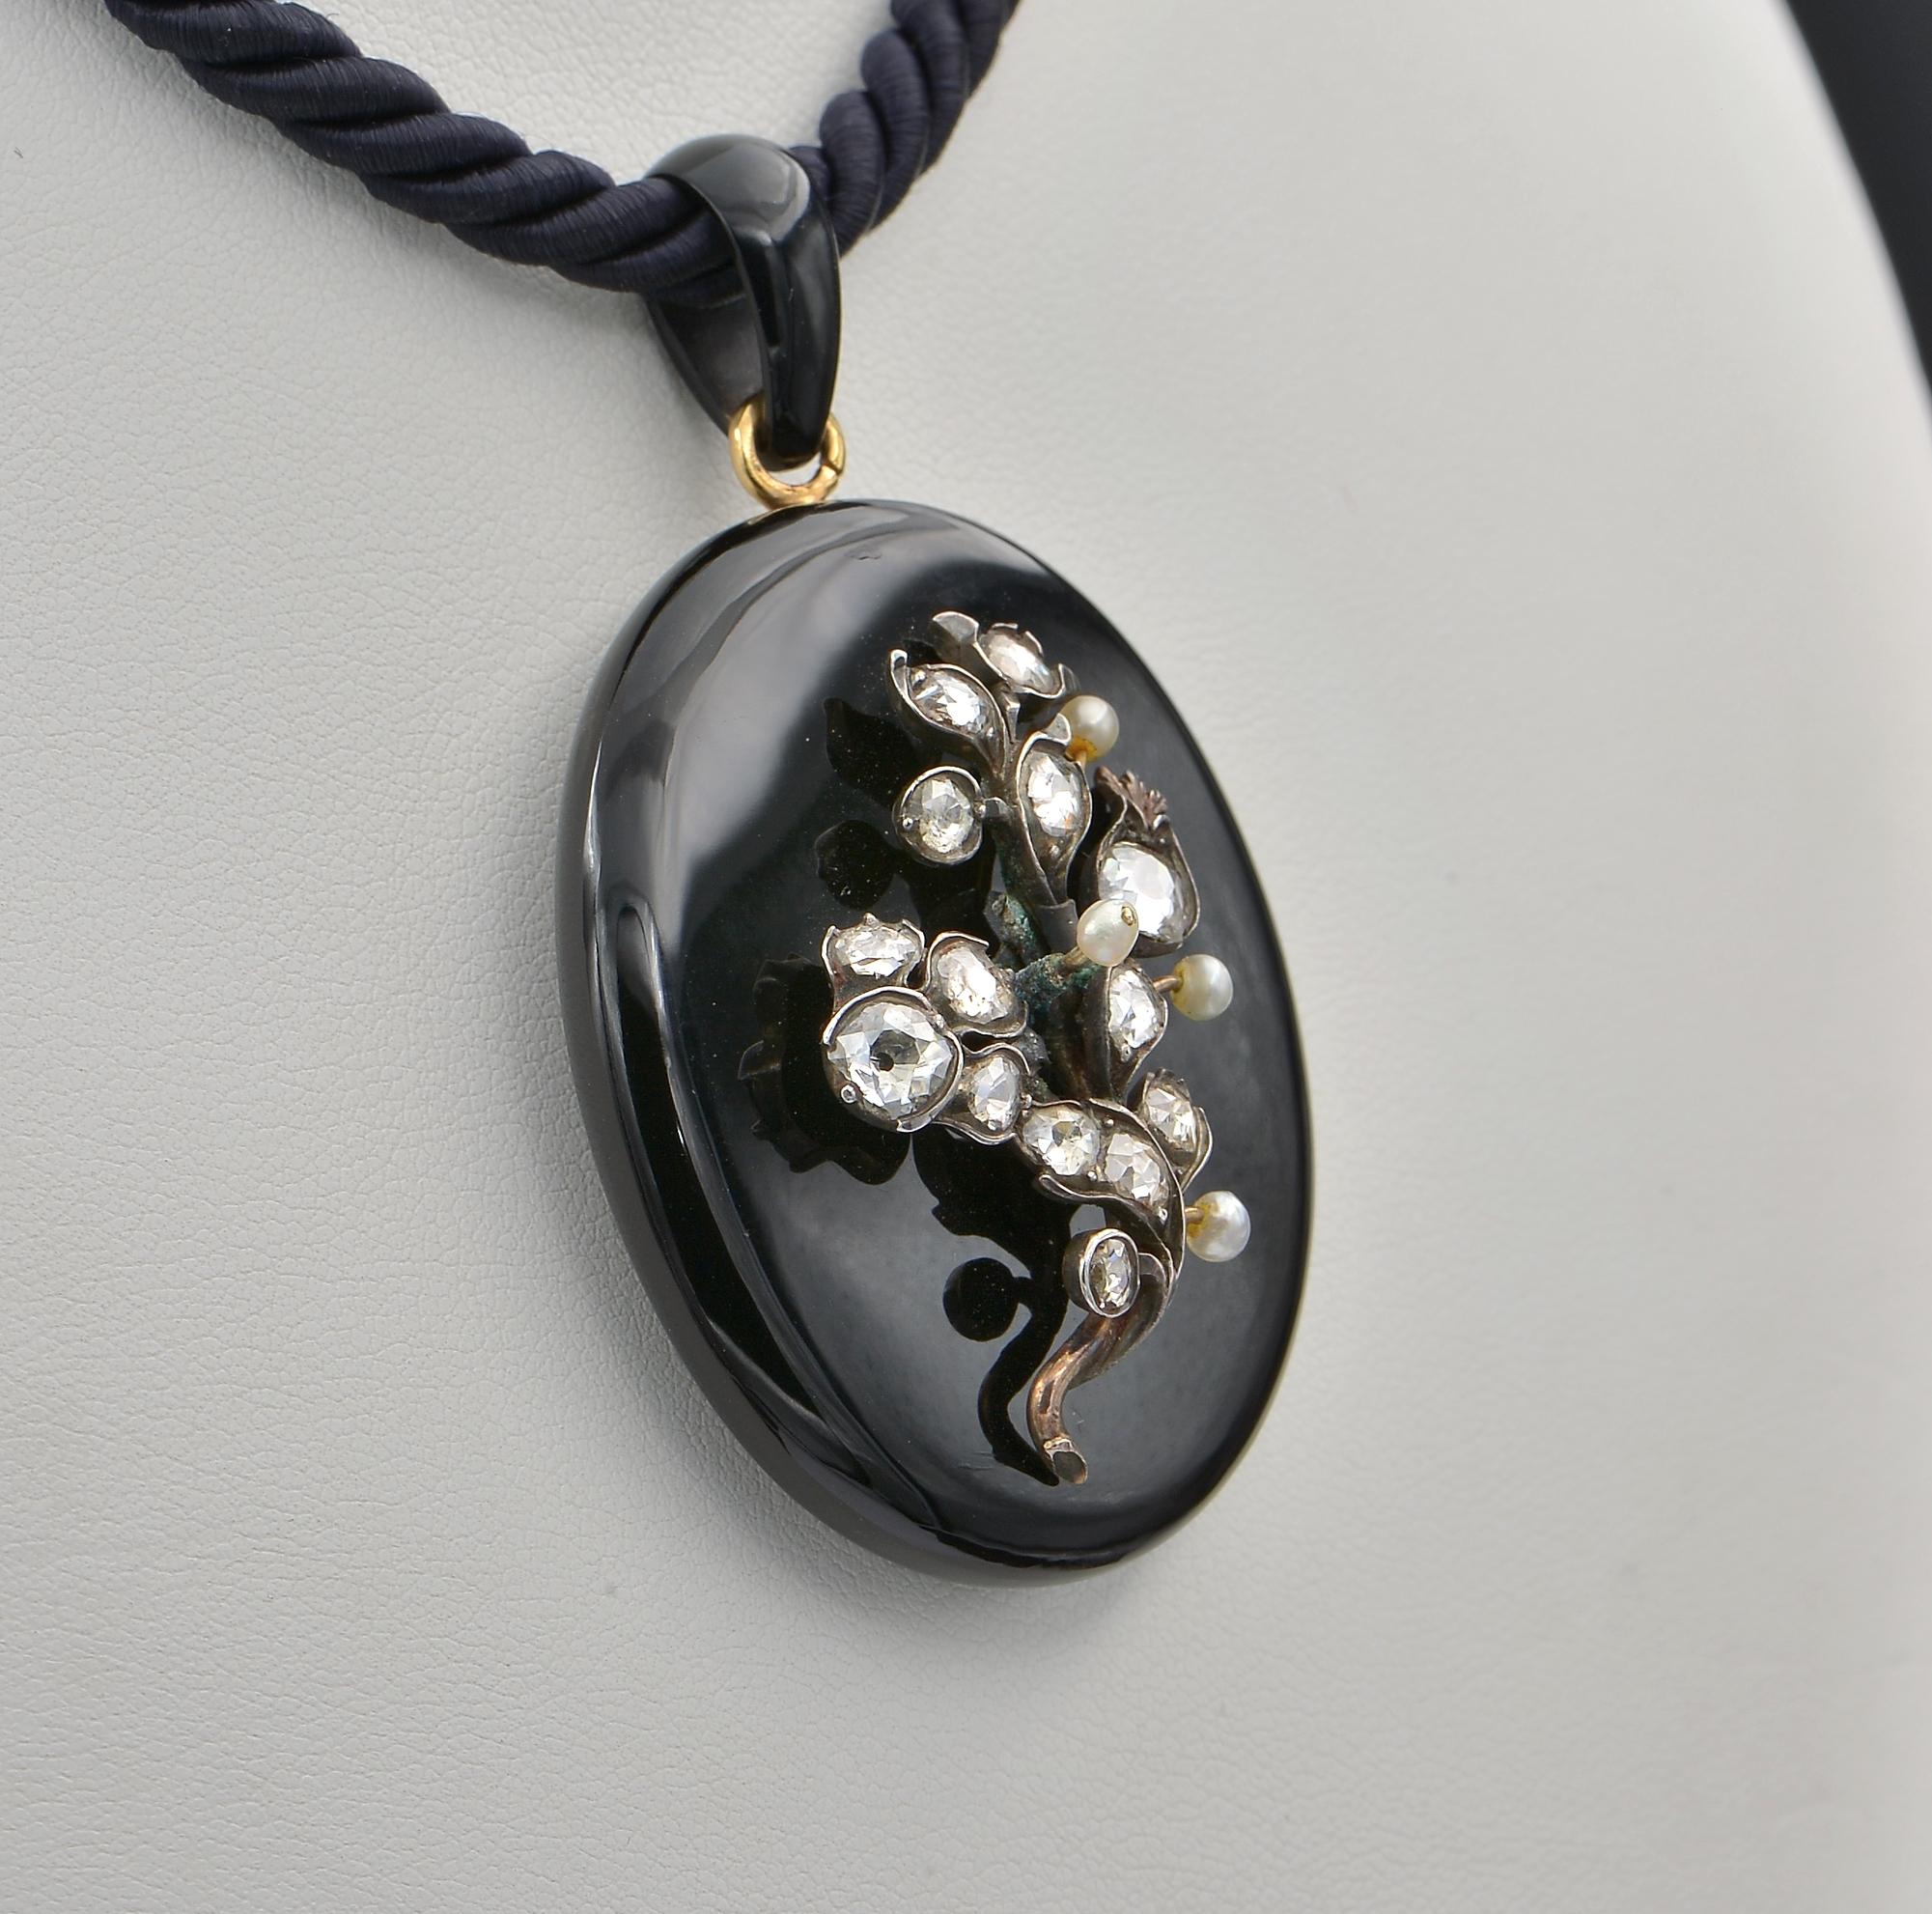 Mourning as treasure
Victorian 1880 ca. spectacular example of large morning locket carved from Black Onyx including the bail, loaded with Diamonds,mounted in solid 18 KT gold with silver portions for the Diamonds set
A magnificent example of